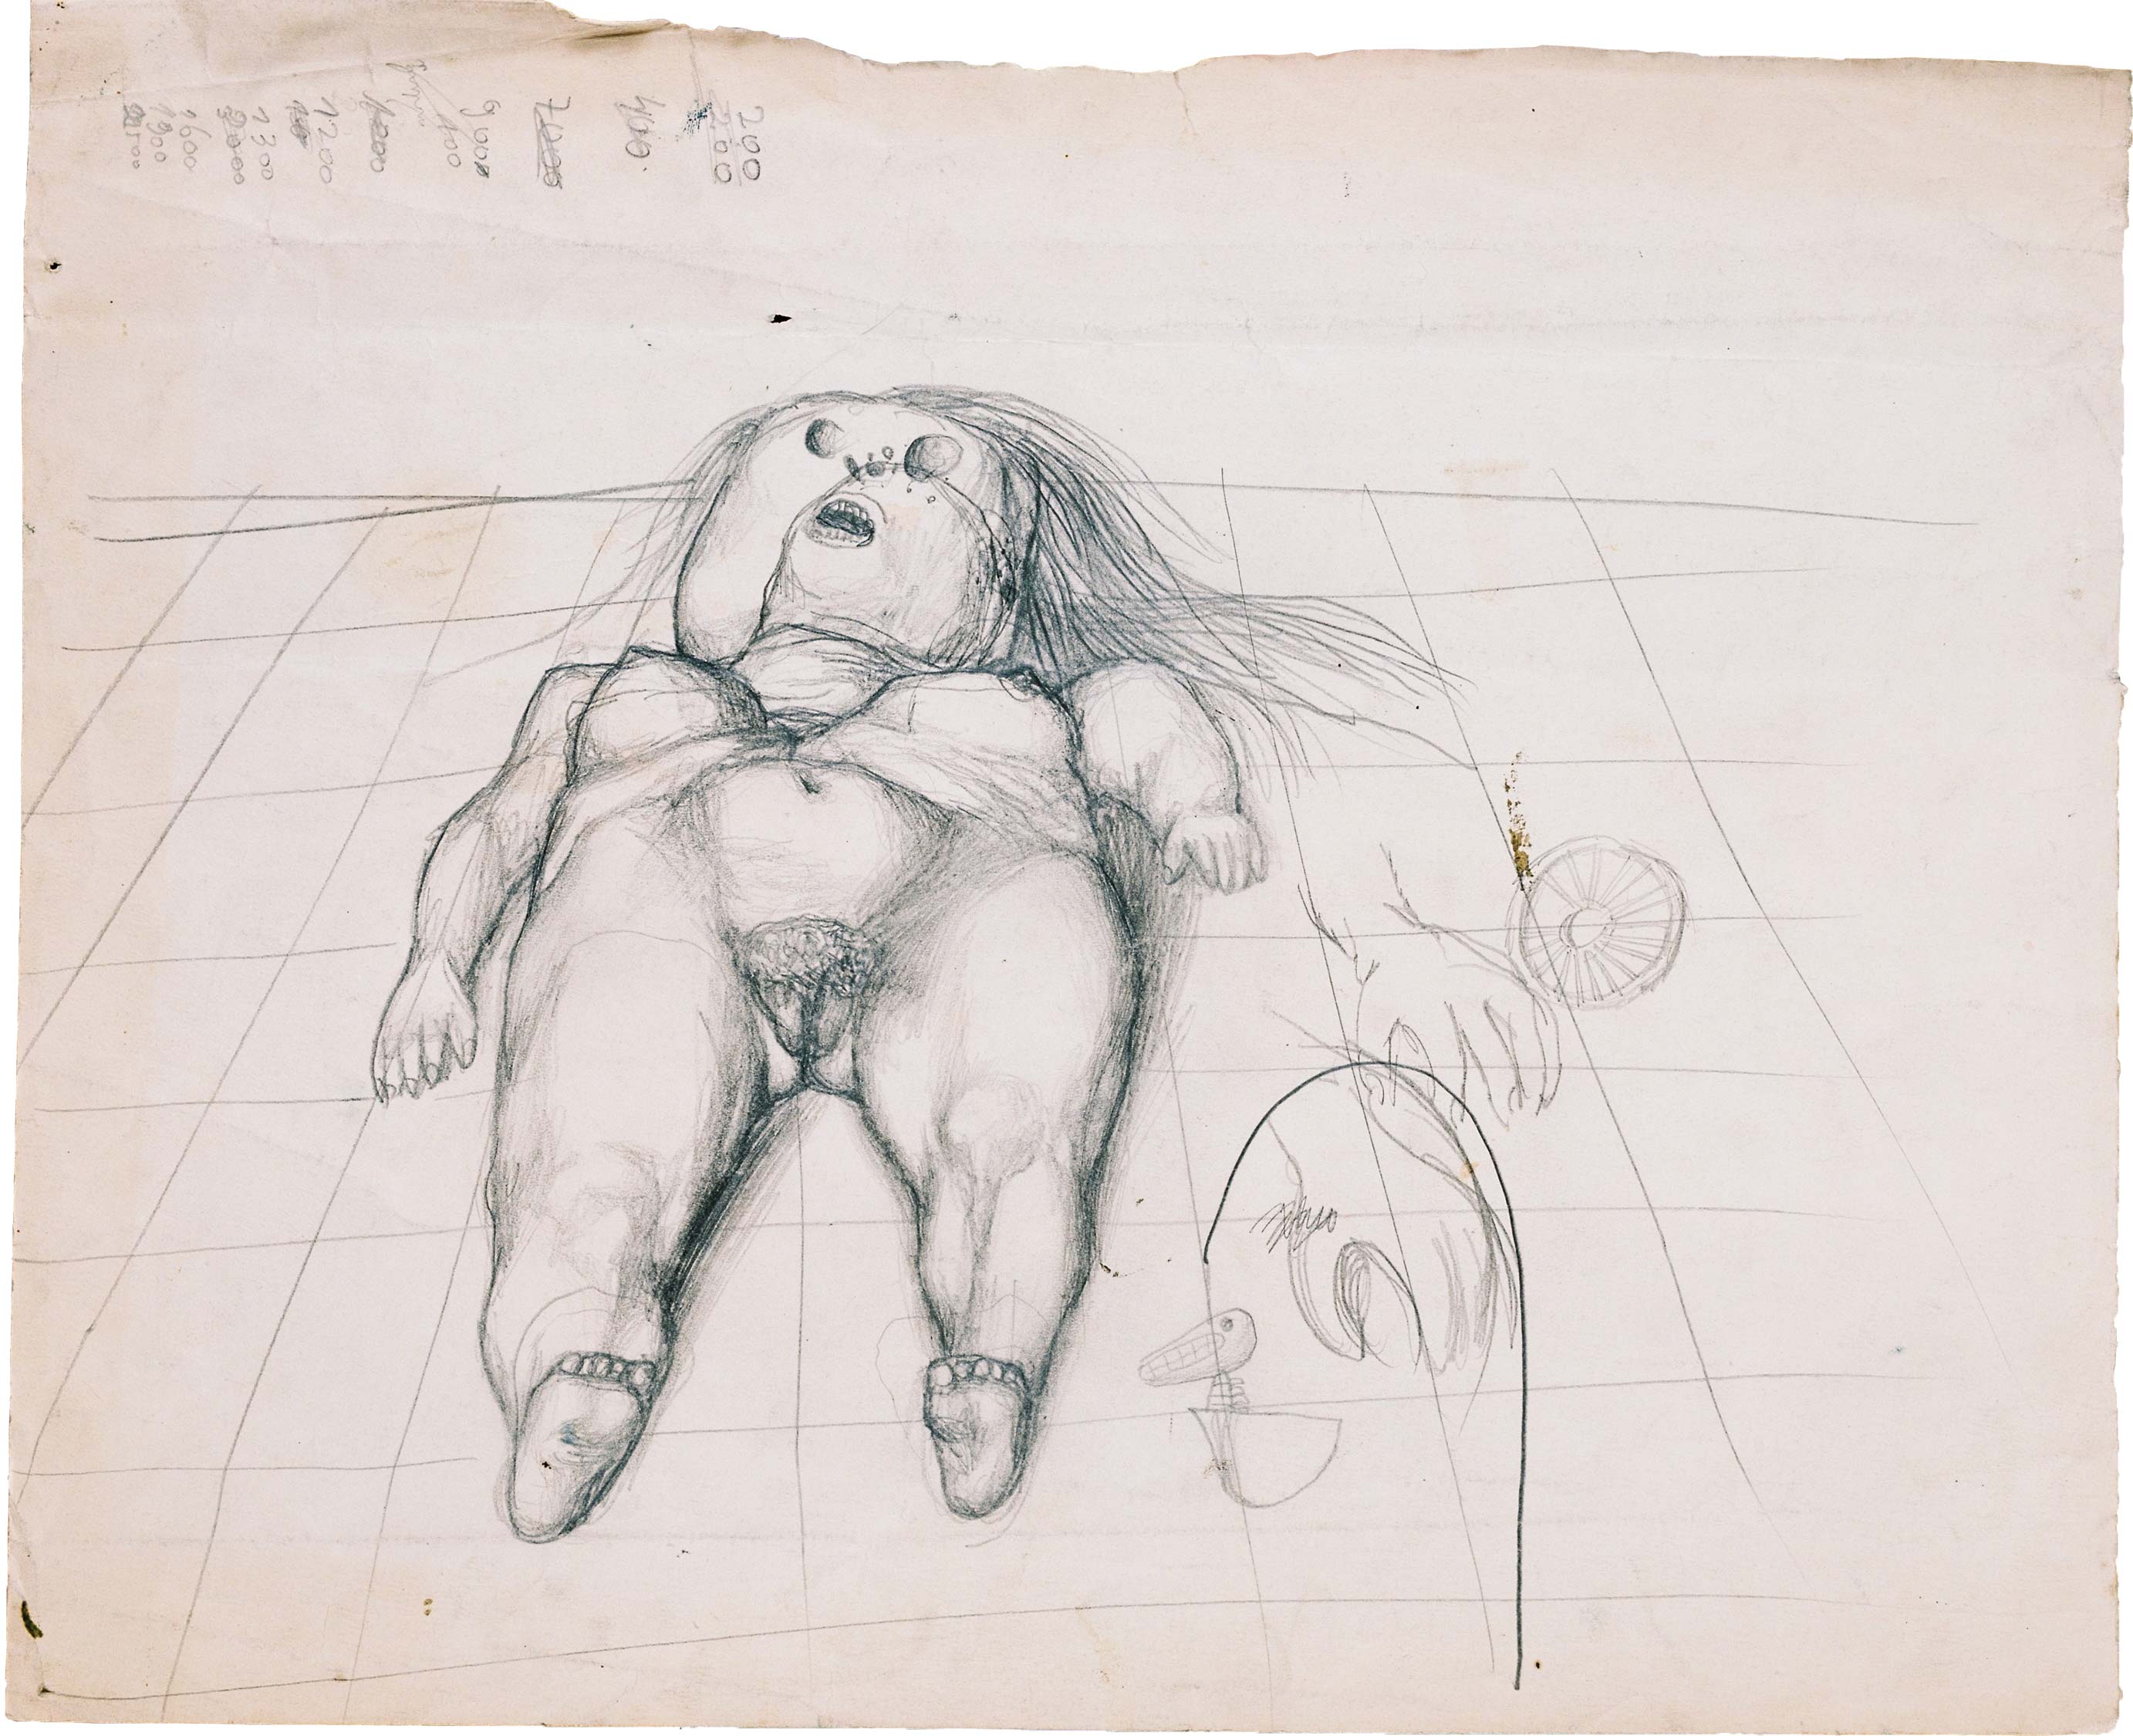 Dado’s drawing: Study for The Crucifixion, 1955